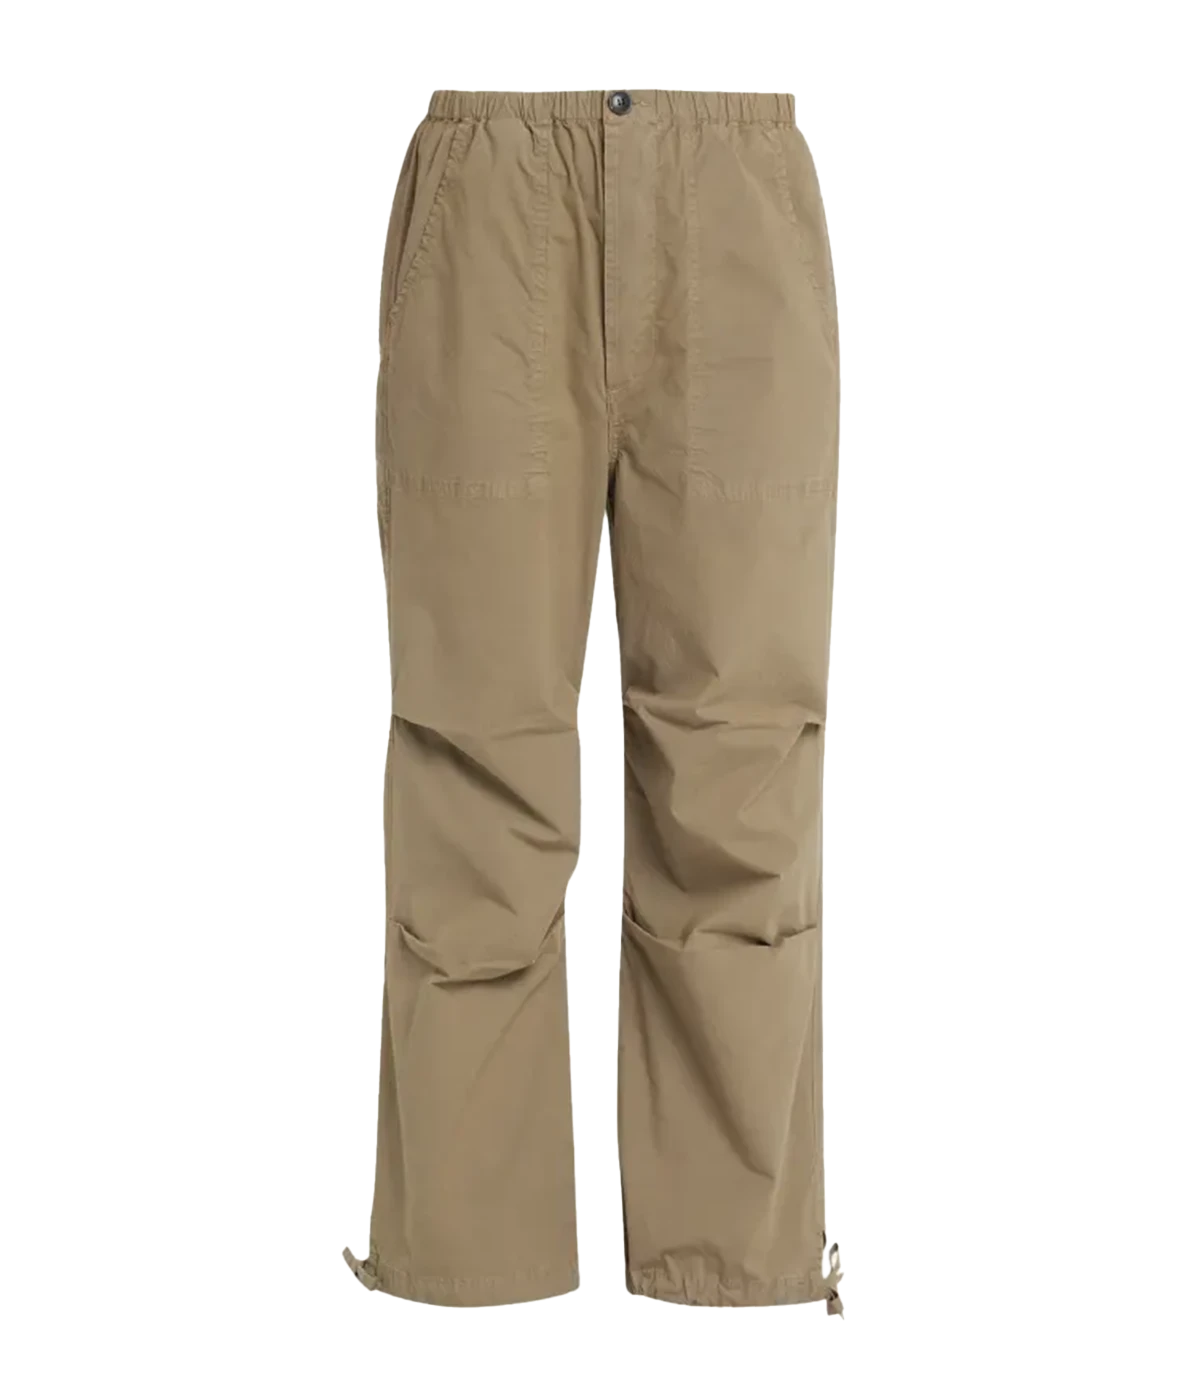 An everyday comfortable throw on and go pant, 100% cotton, parachute oversize style, Button fly closure and elastic waist, 4 pockets and drawstring ankles, olive green. Made in USA, comfortable, everyday pant, running errands, summer staple. 